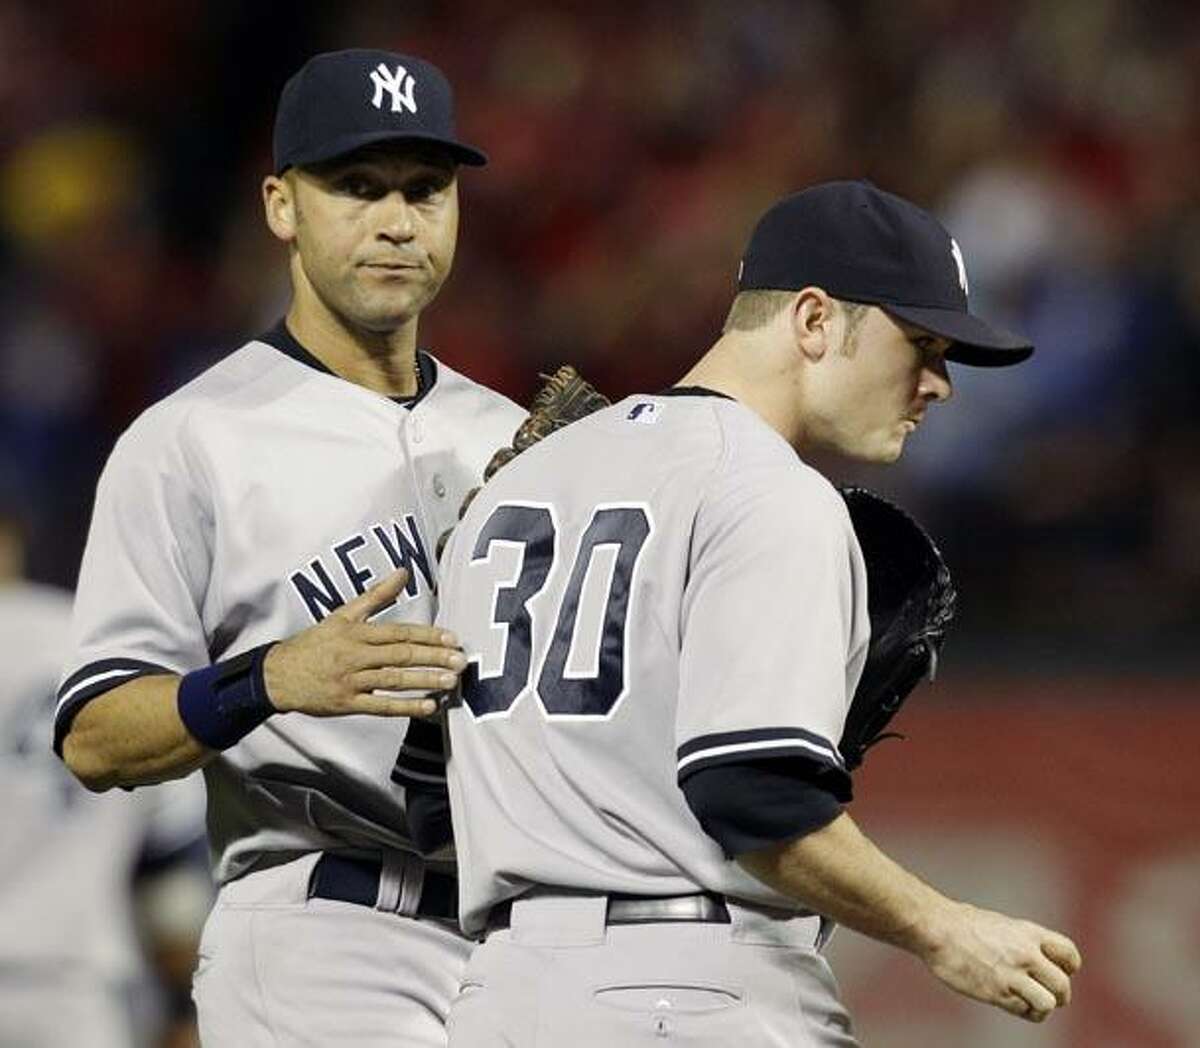 New York Yankees shortstop Derek Jeter, left, tries to calm relief pitcher David Robertson after Robertson gave up a two-run home run to Texas Rangers' Nelson Cruz in the fifth inning of Game 6 of baseball's American League Championship Series Friday in Arlington, Texas. (AP Photo/Tony Gutierrez)